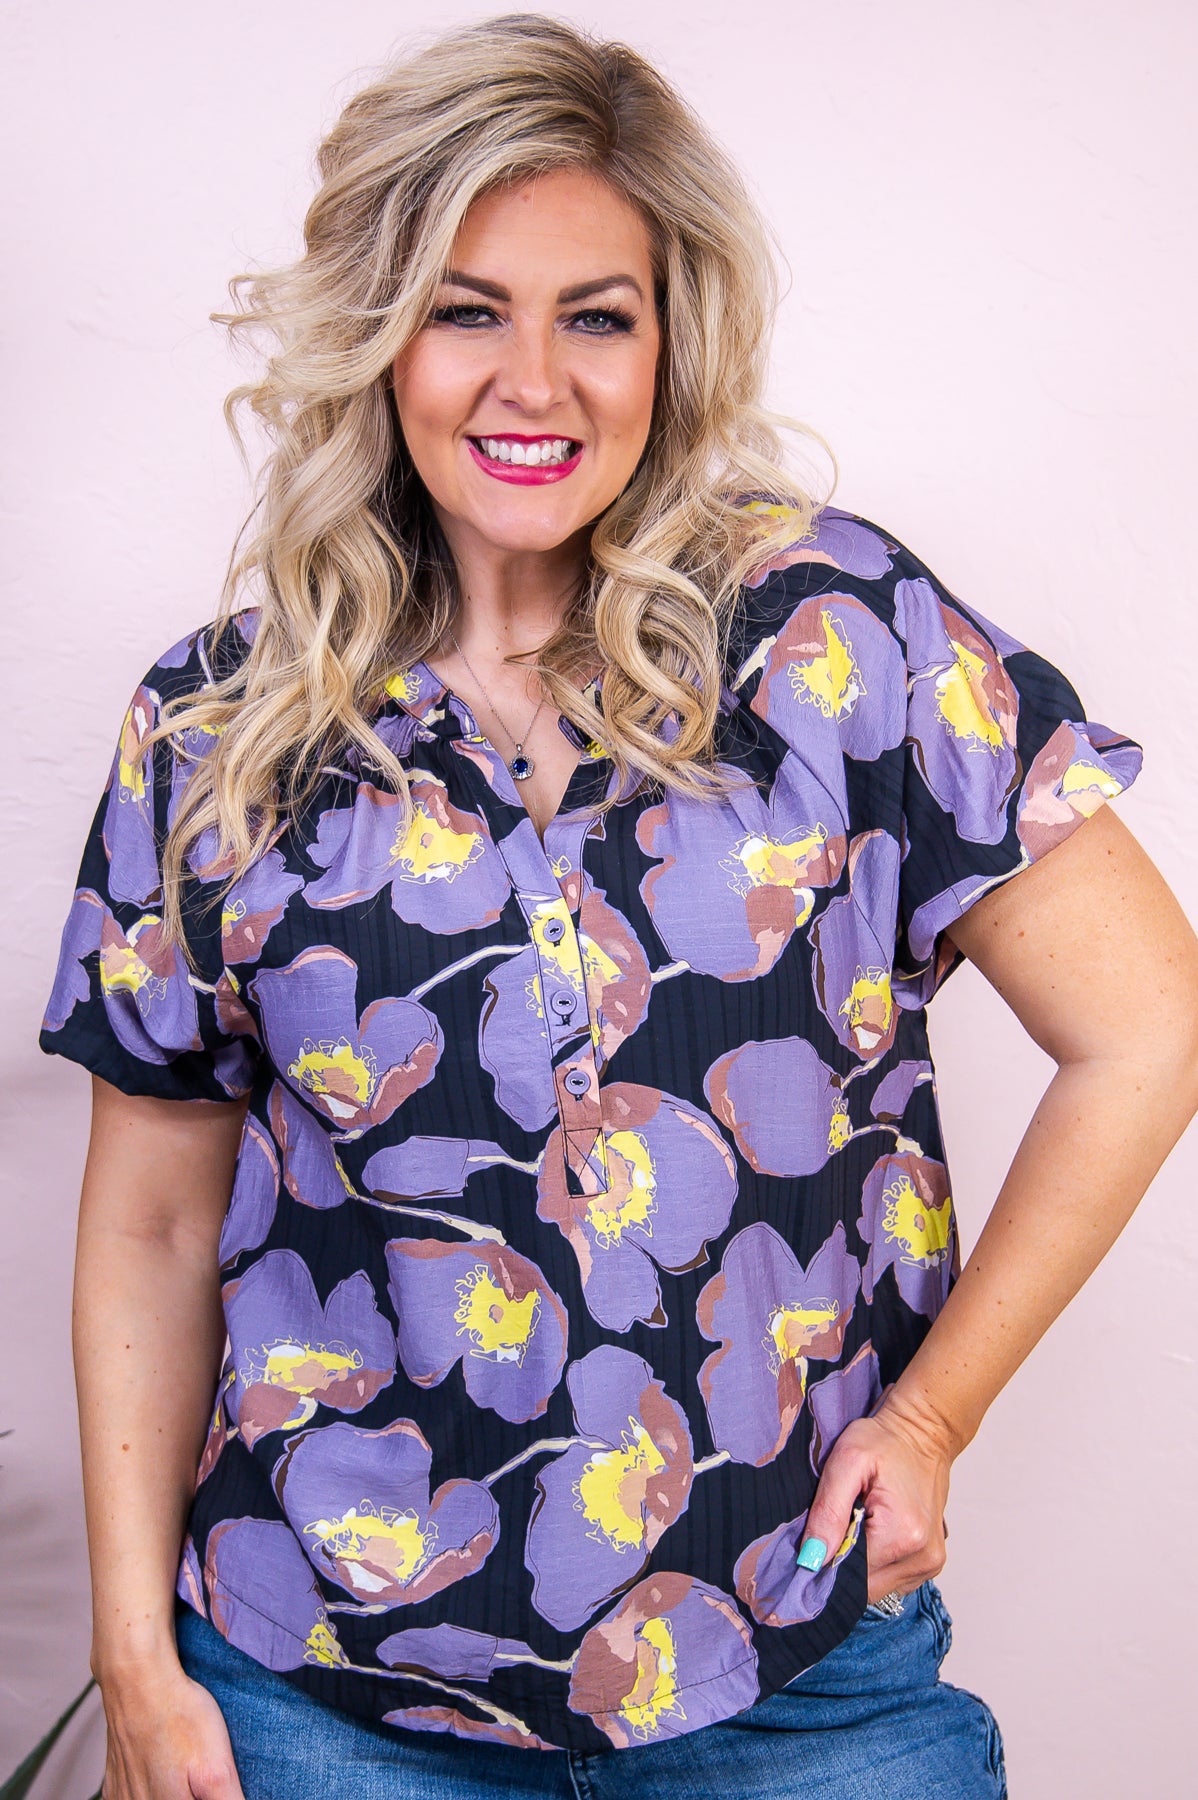 Kisses From Cabo Black/Multi Color Printed Top - T9449BK